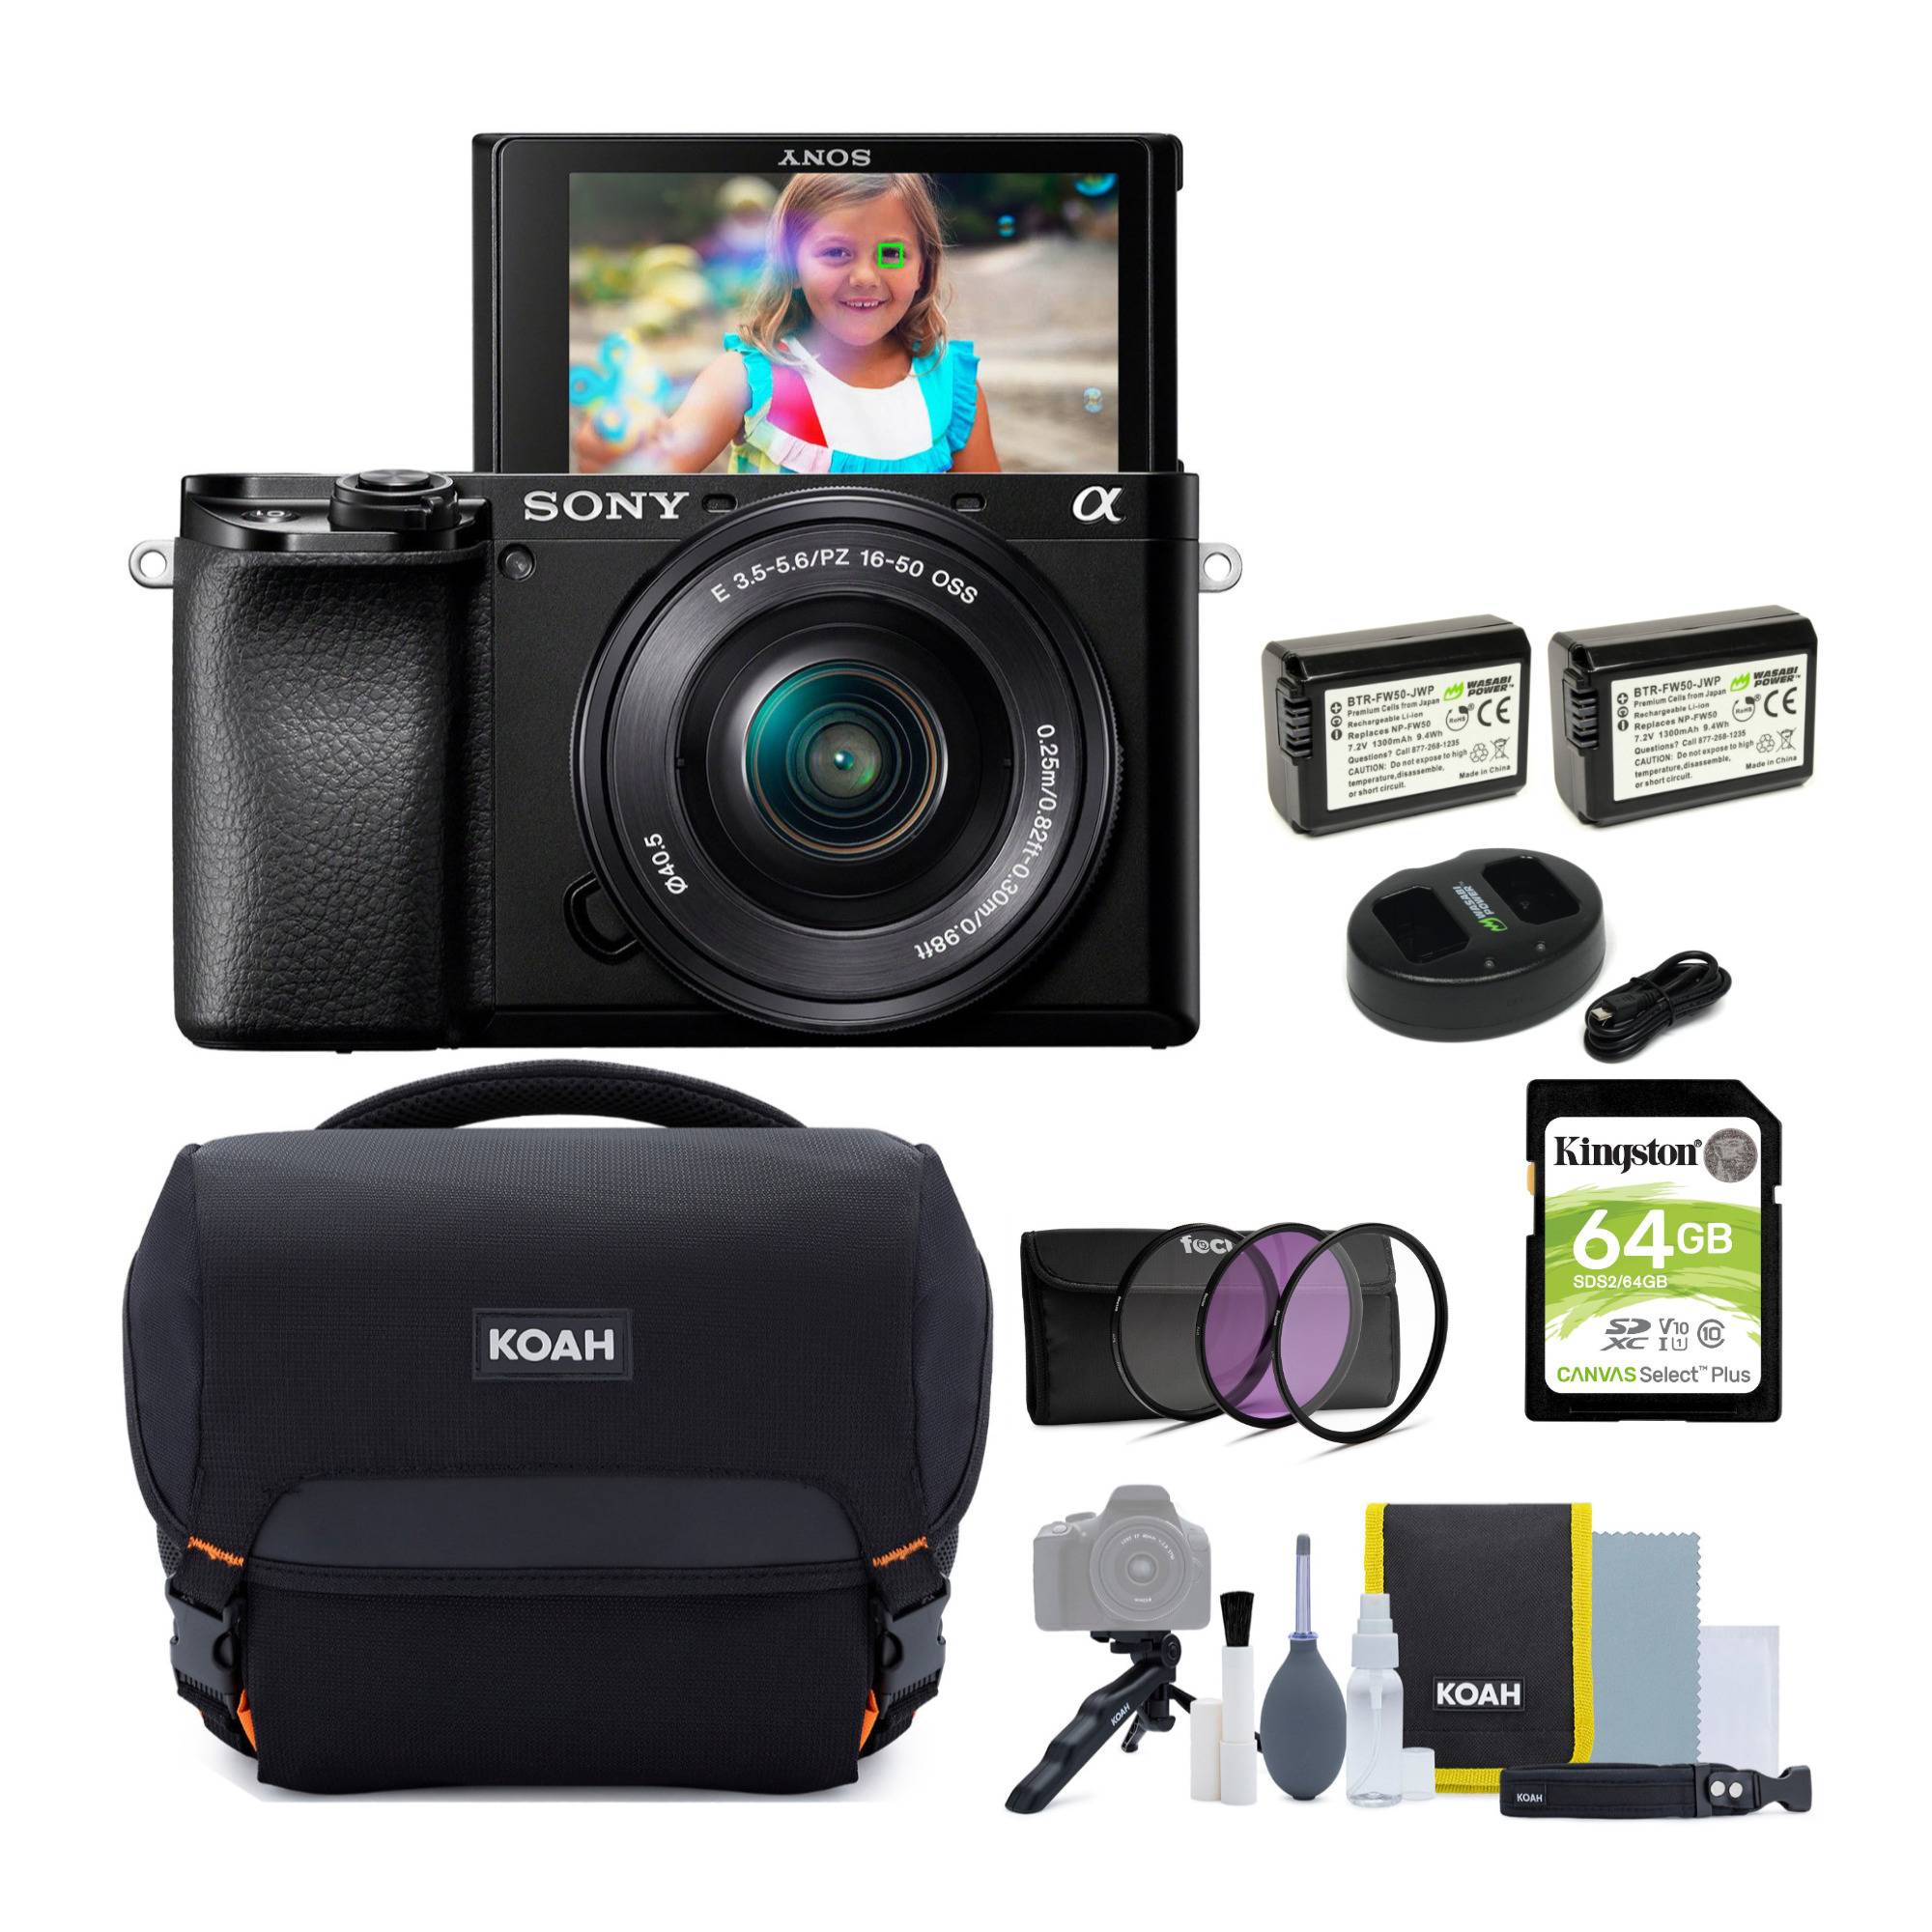 Sony Alpha a6100 APS-C Mirrorless Interchangeable-Lens Camera with 16-50mm Lens and Bag Bundle